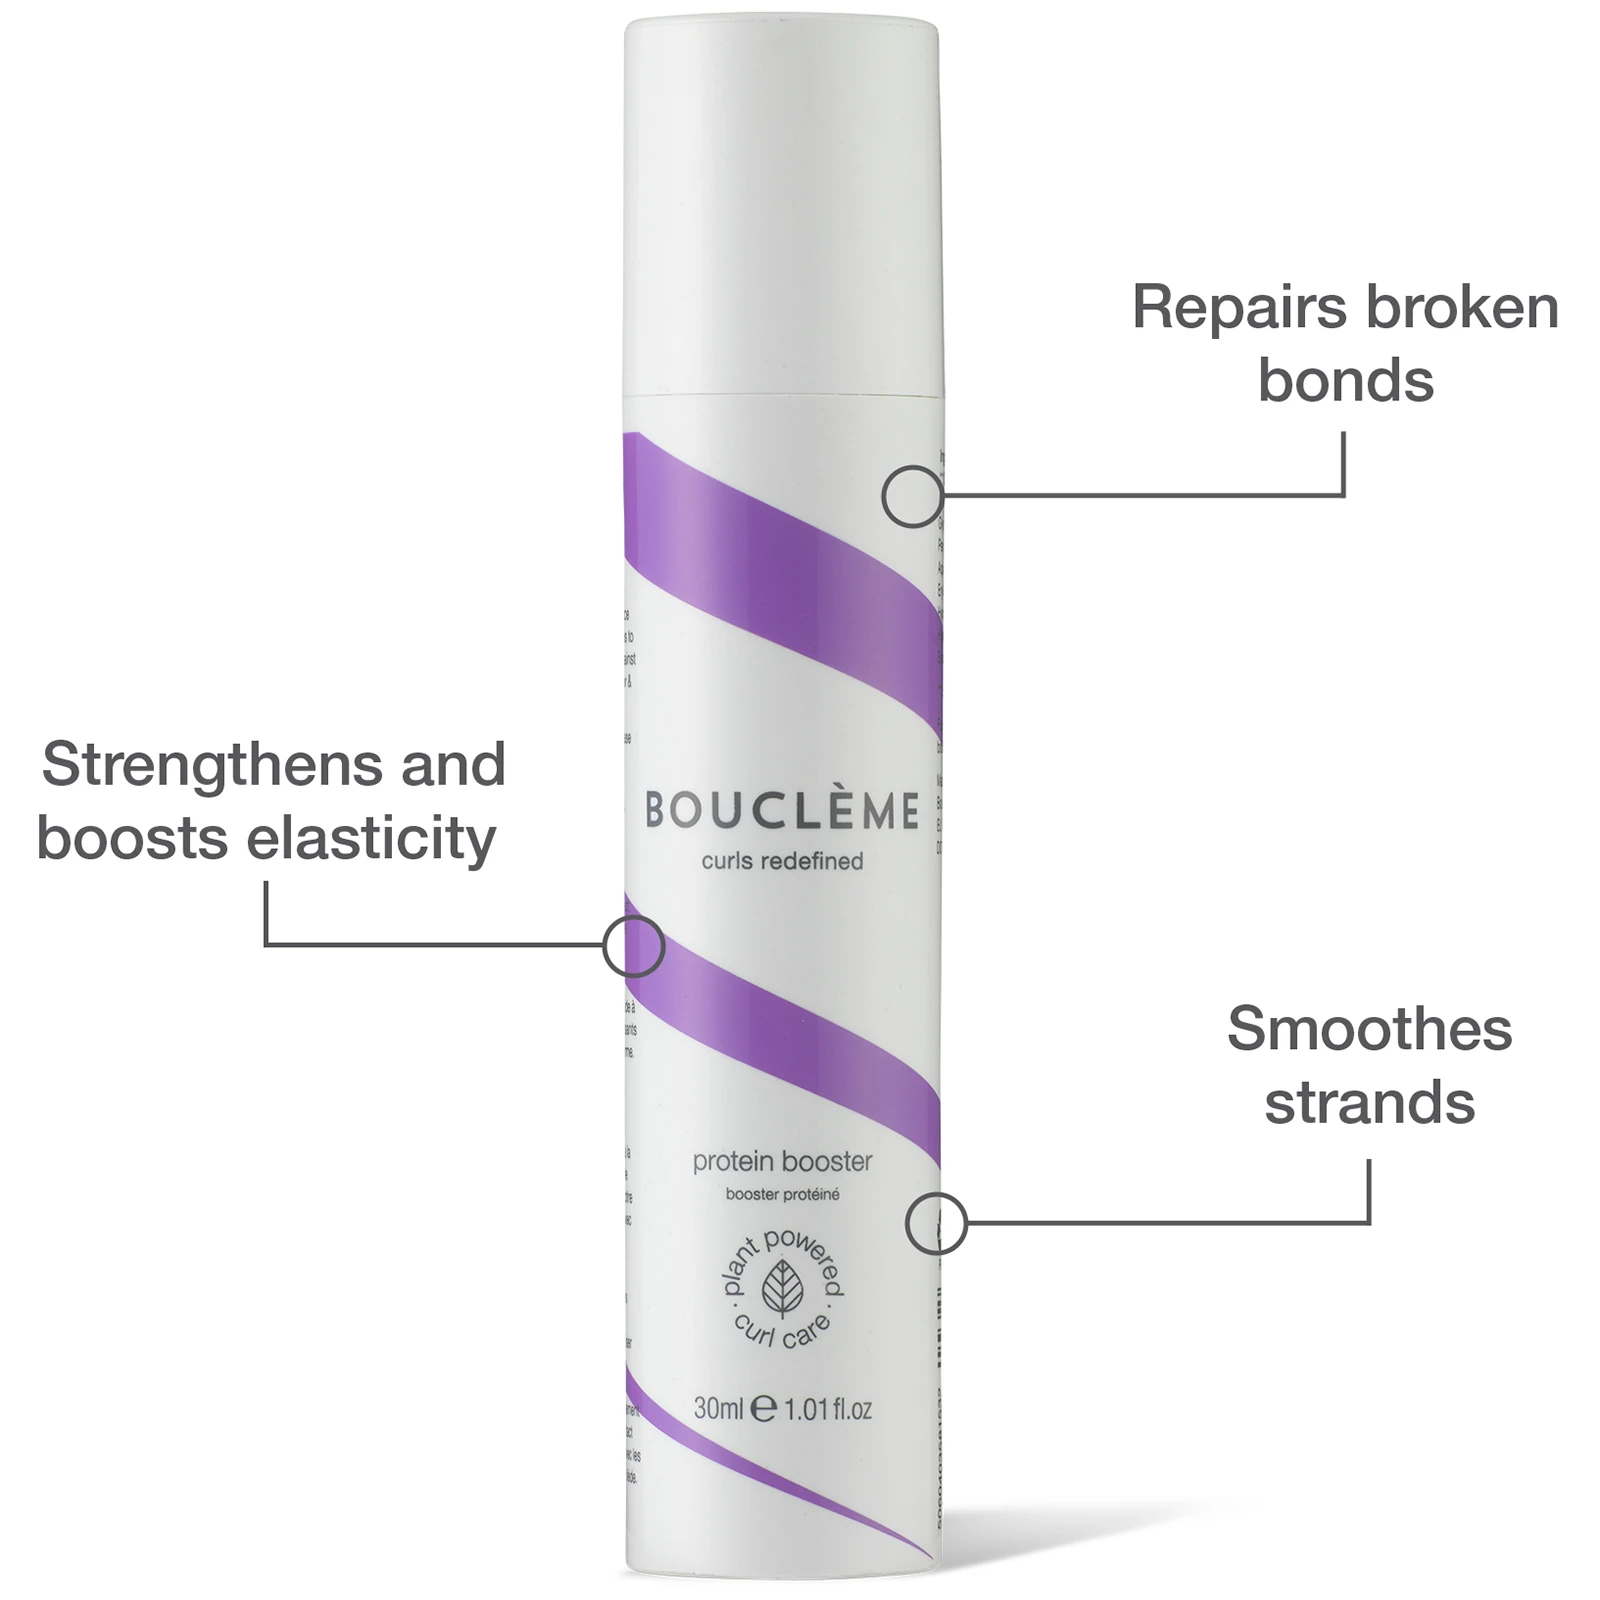 repairs broken bonds, strengthens and boosts elasticity, smoothes strands.